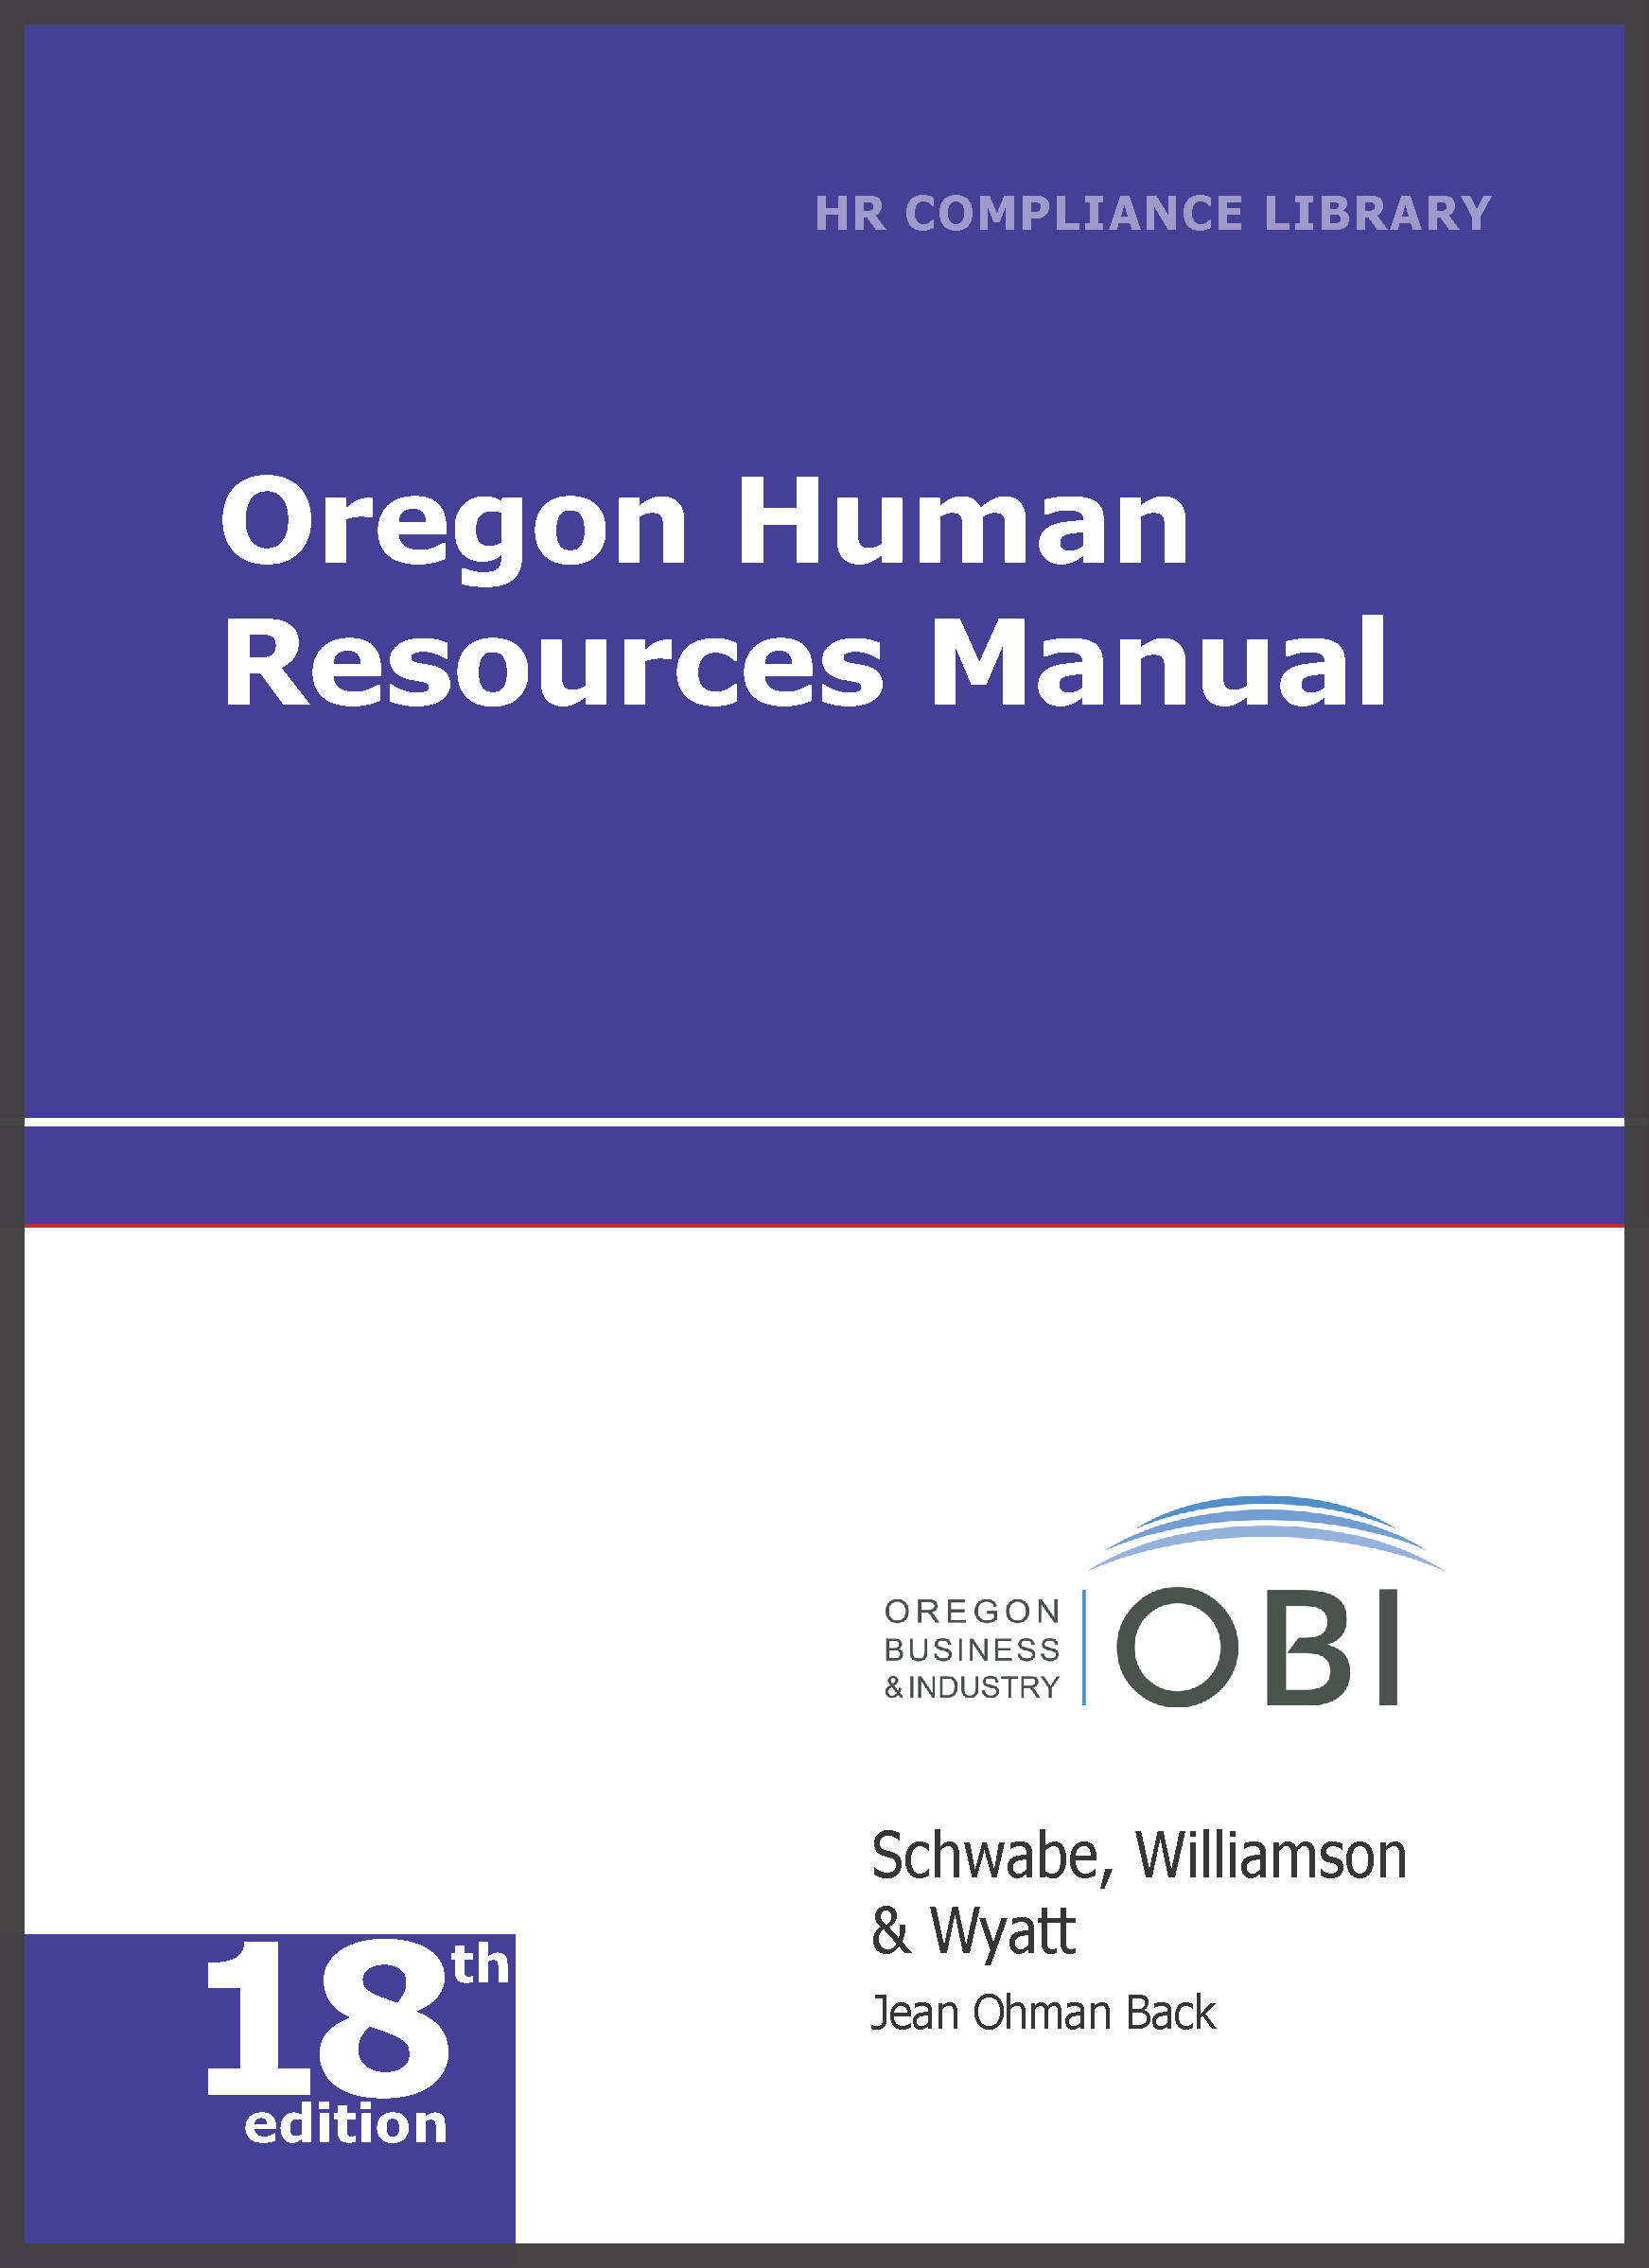 Oregon Human Resources Library—Online Only employment law image, remote work, labor laws, employment laws, right to work, order of protection, minimum wage